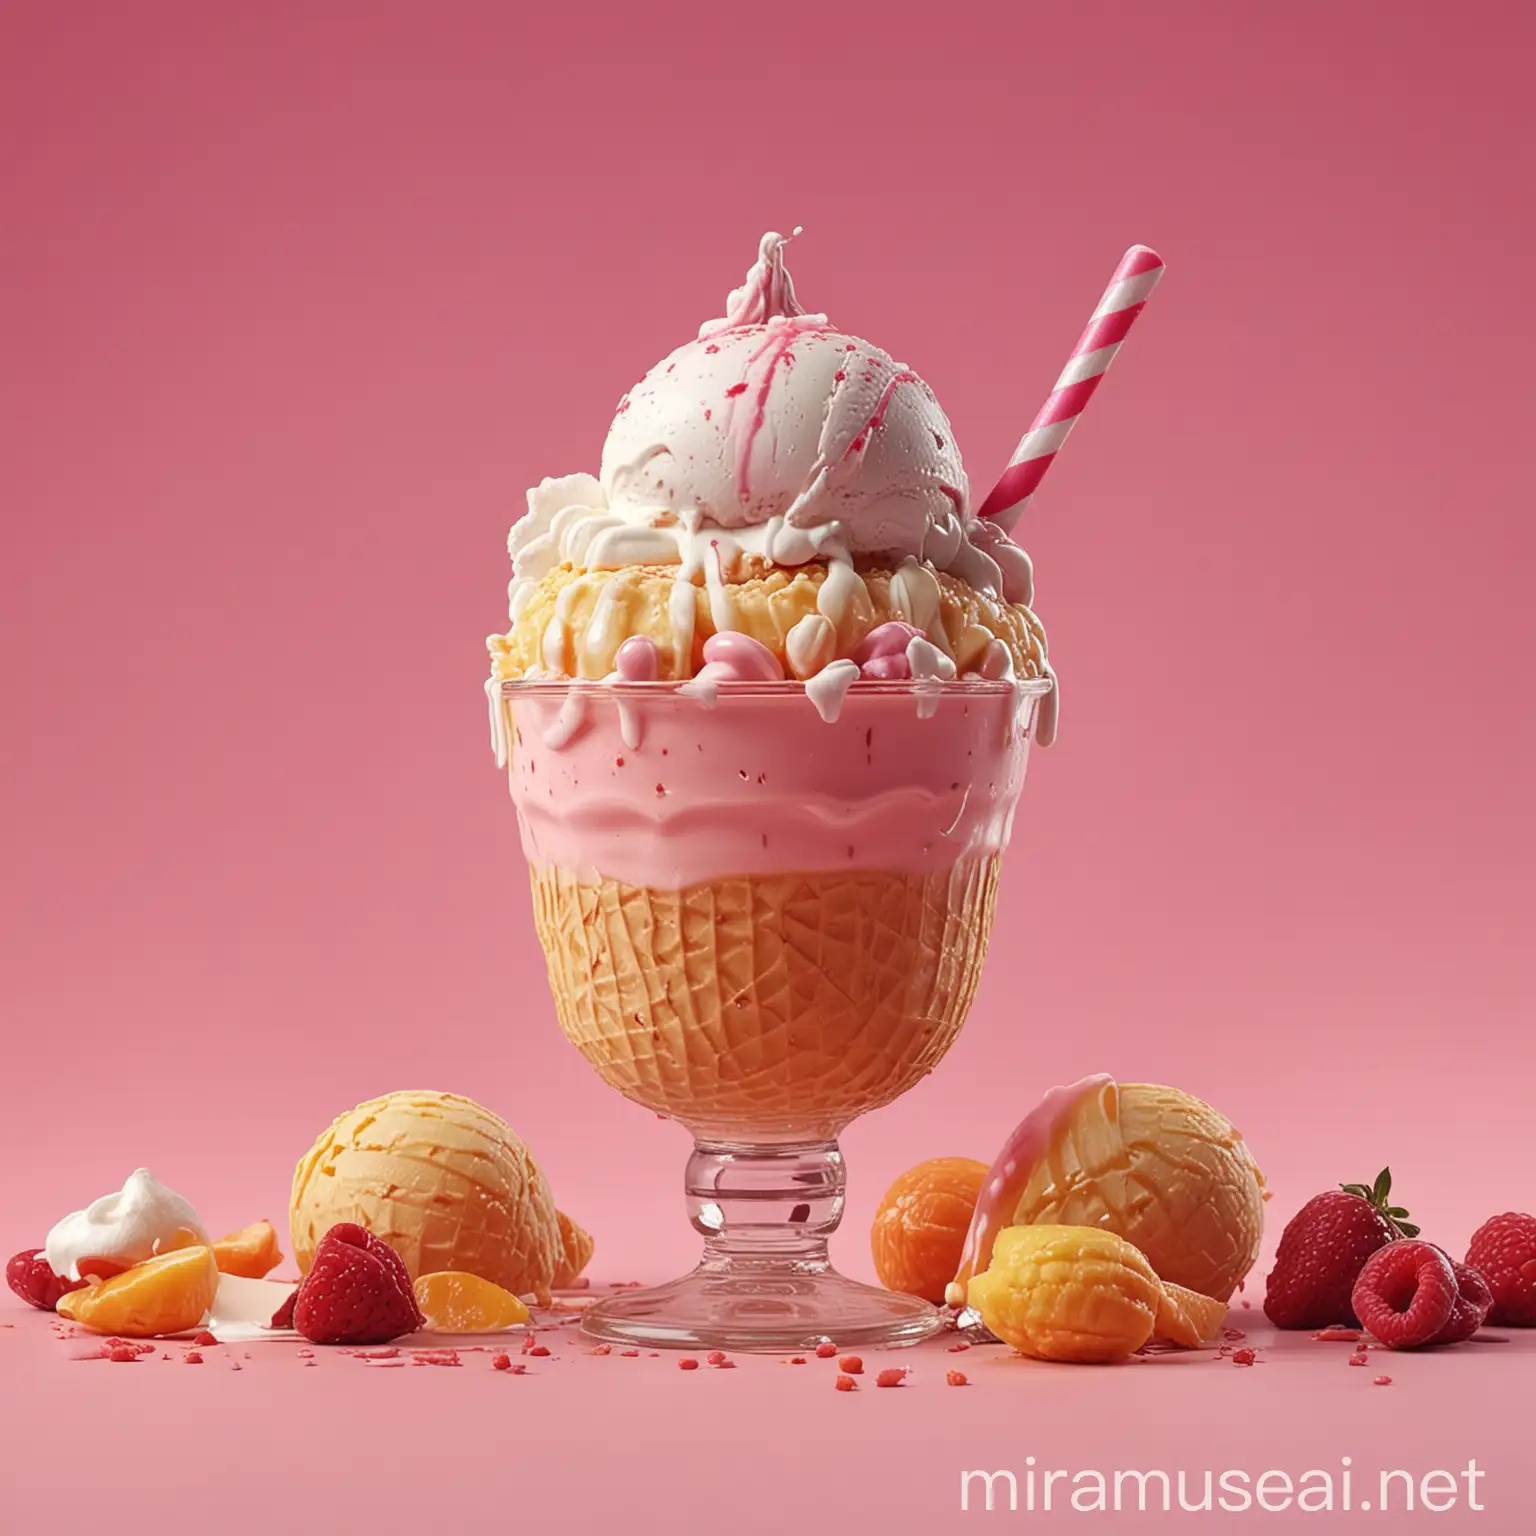 icecream with milk and juices, Confectionery decorated, high detail, 4k resolution in the pink background